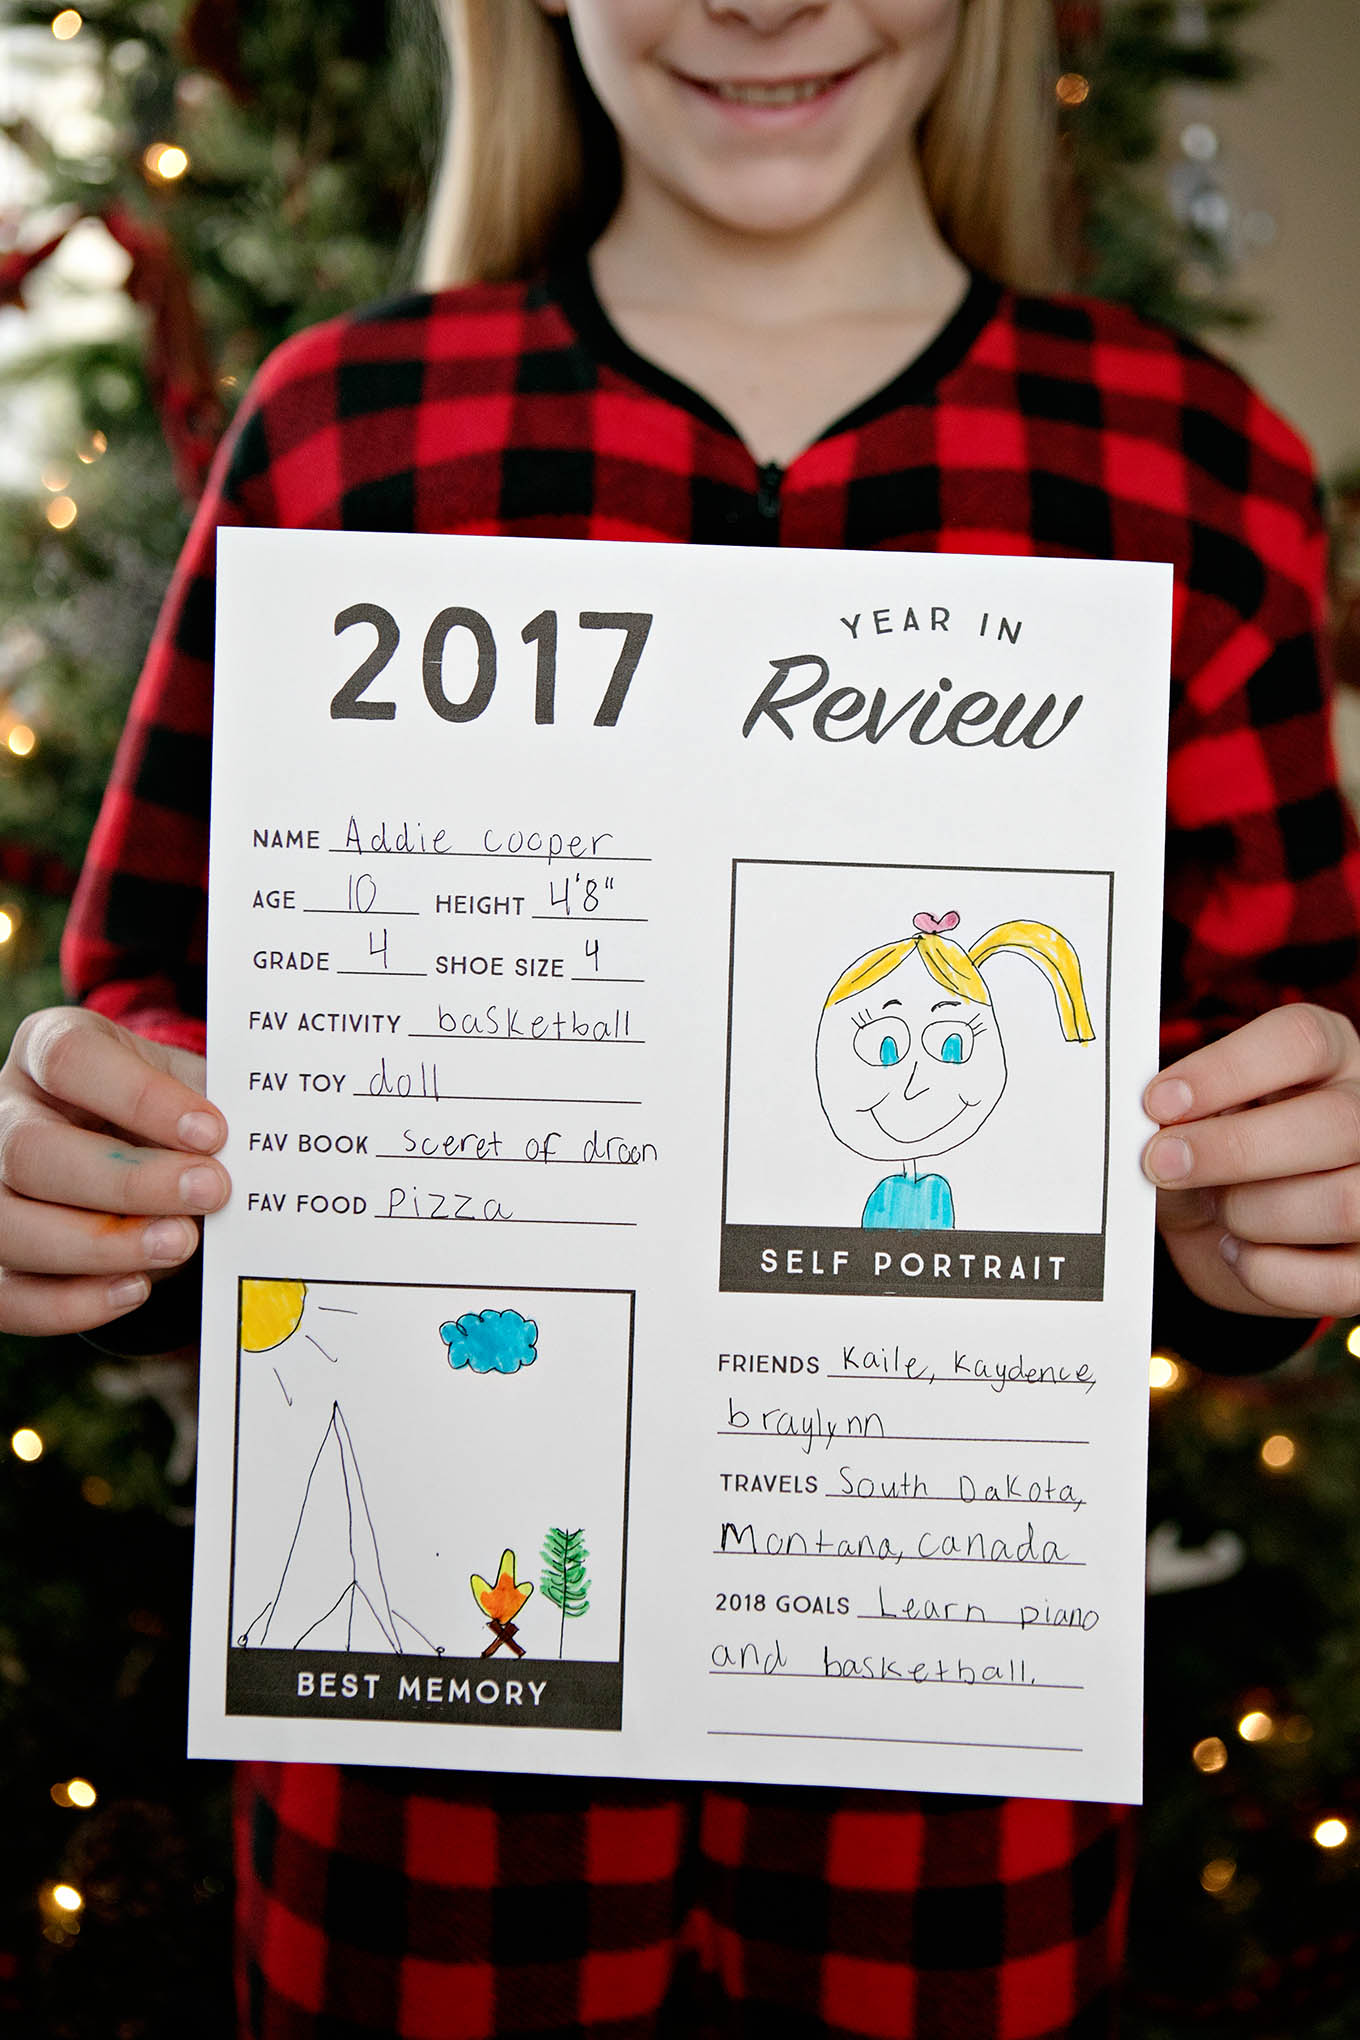 This free printable year in review sheet gives children a chance to reflect on their favorite memories from the past year and look ahead to new goals and adventures in 2018!